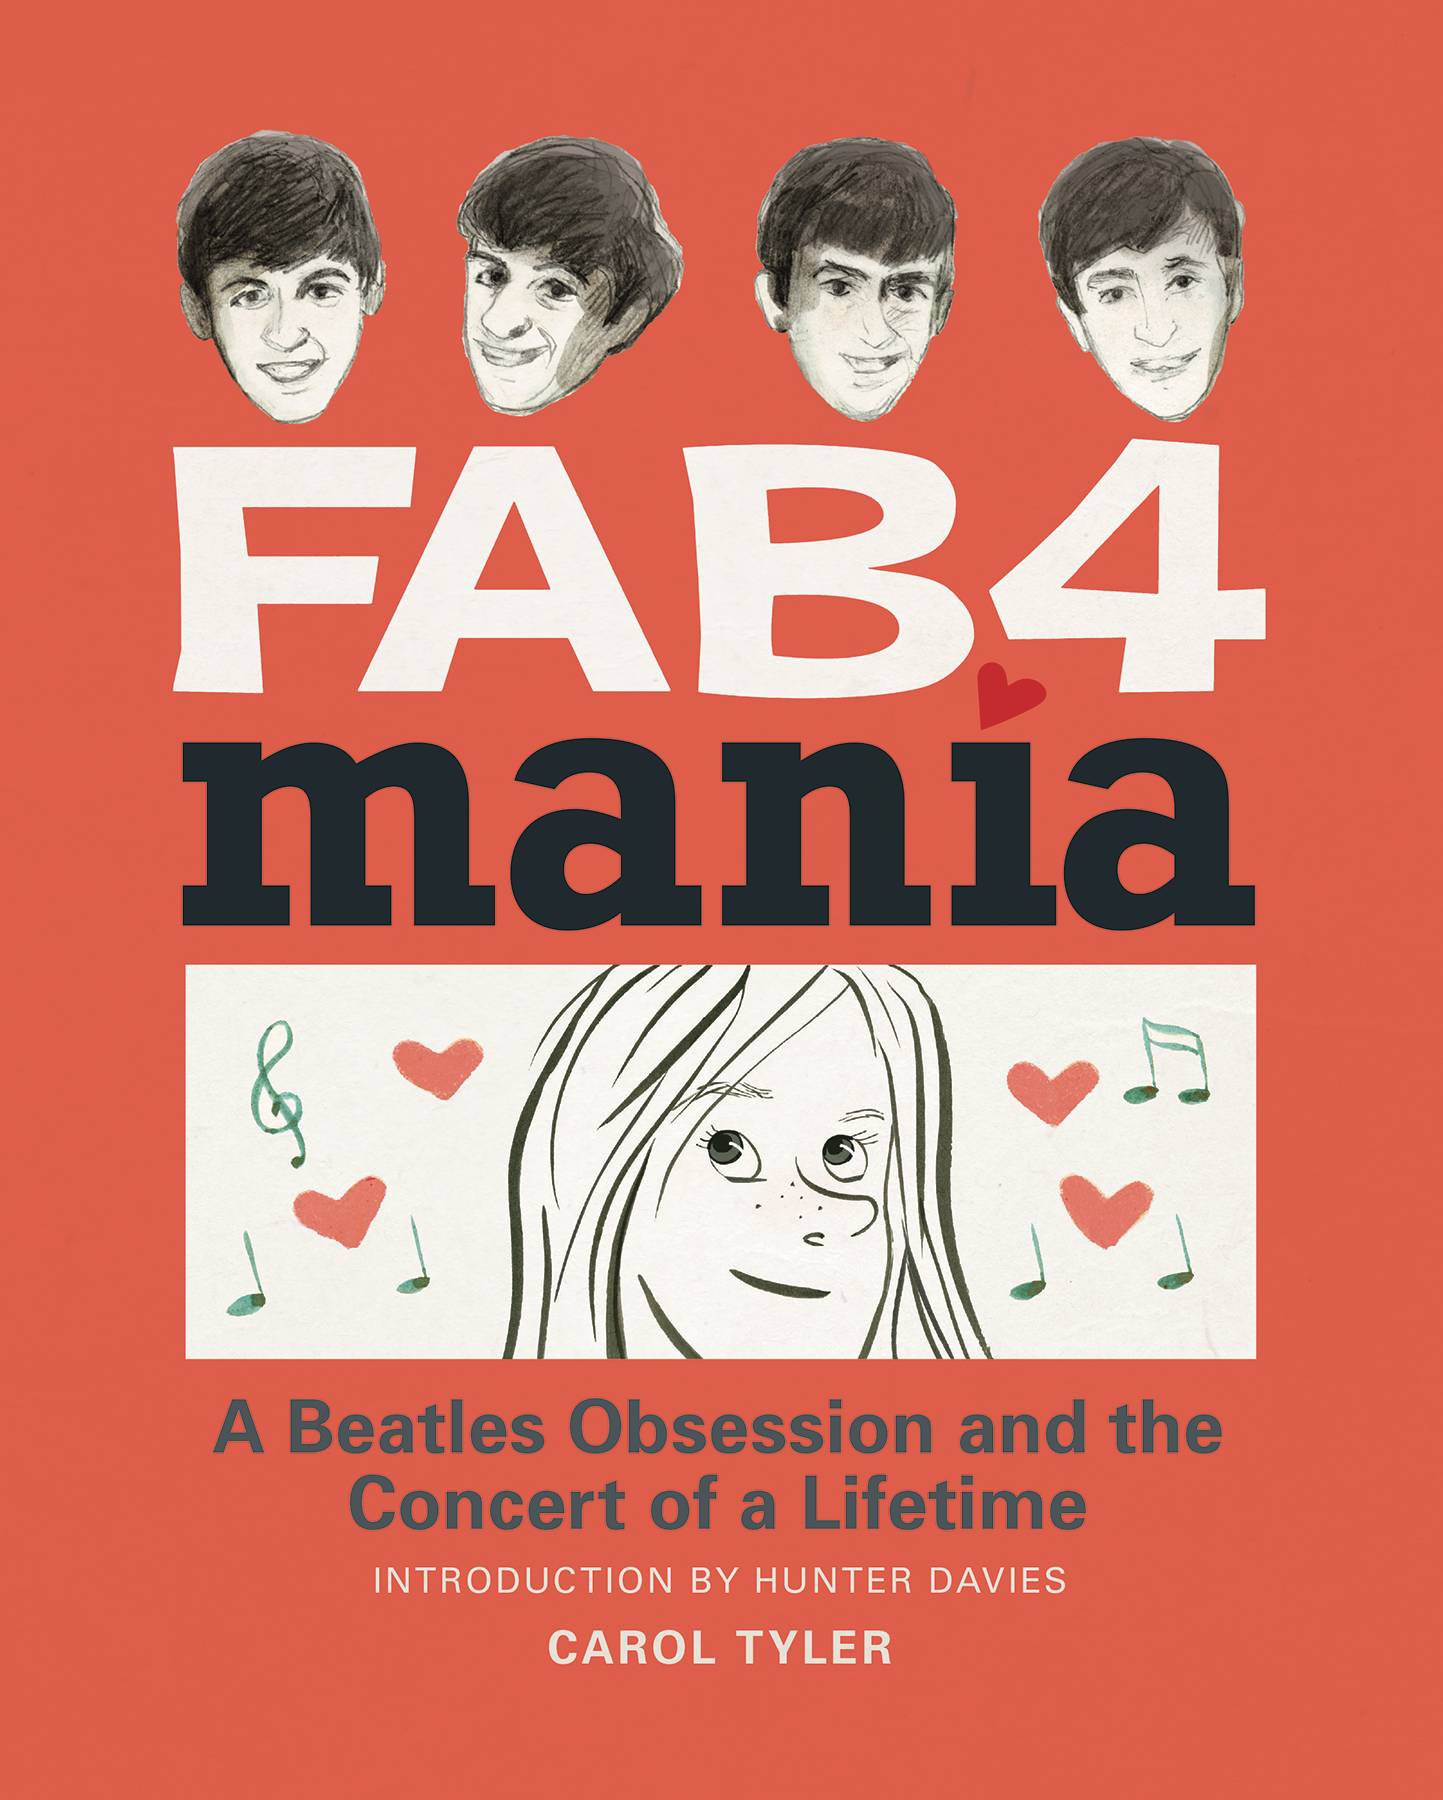 Fab 4 Mania Graphic Novel Beatles Obsession